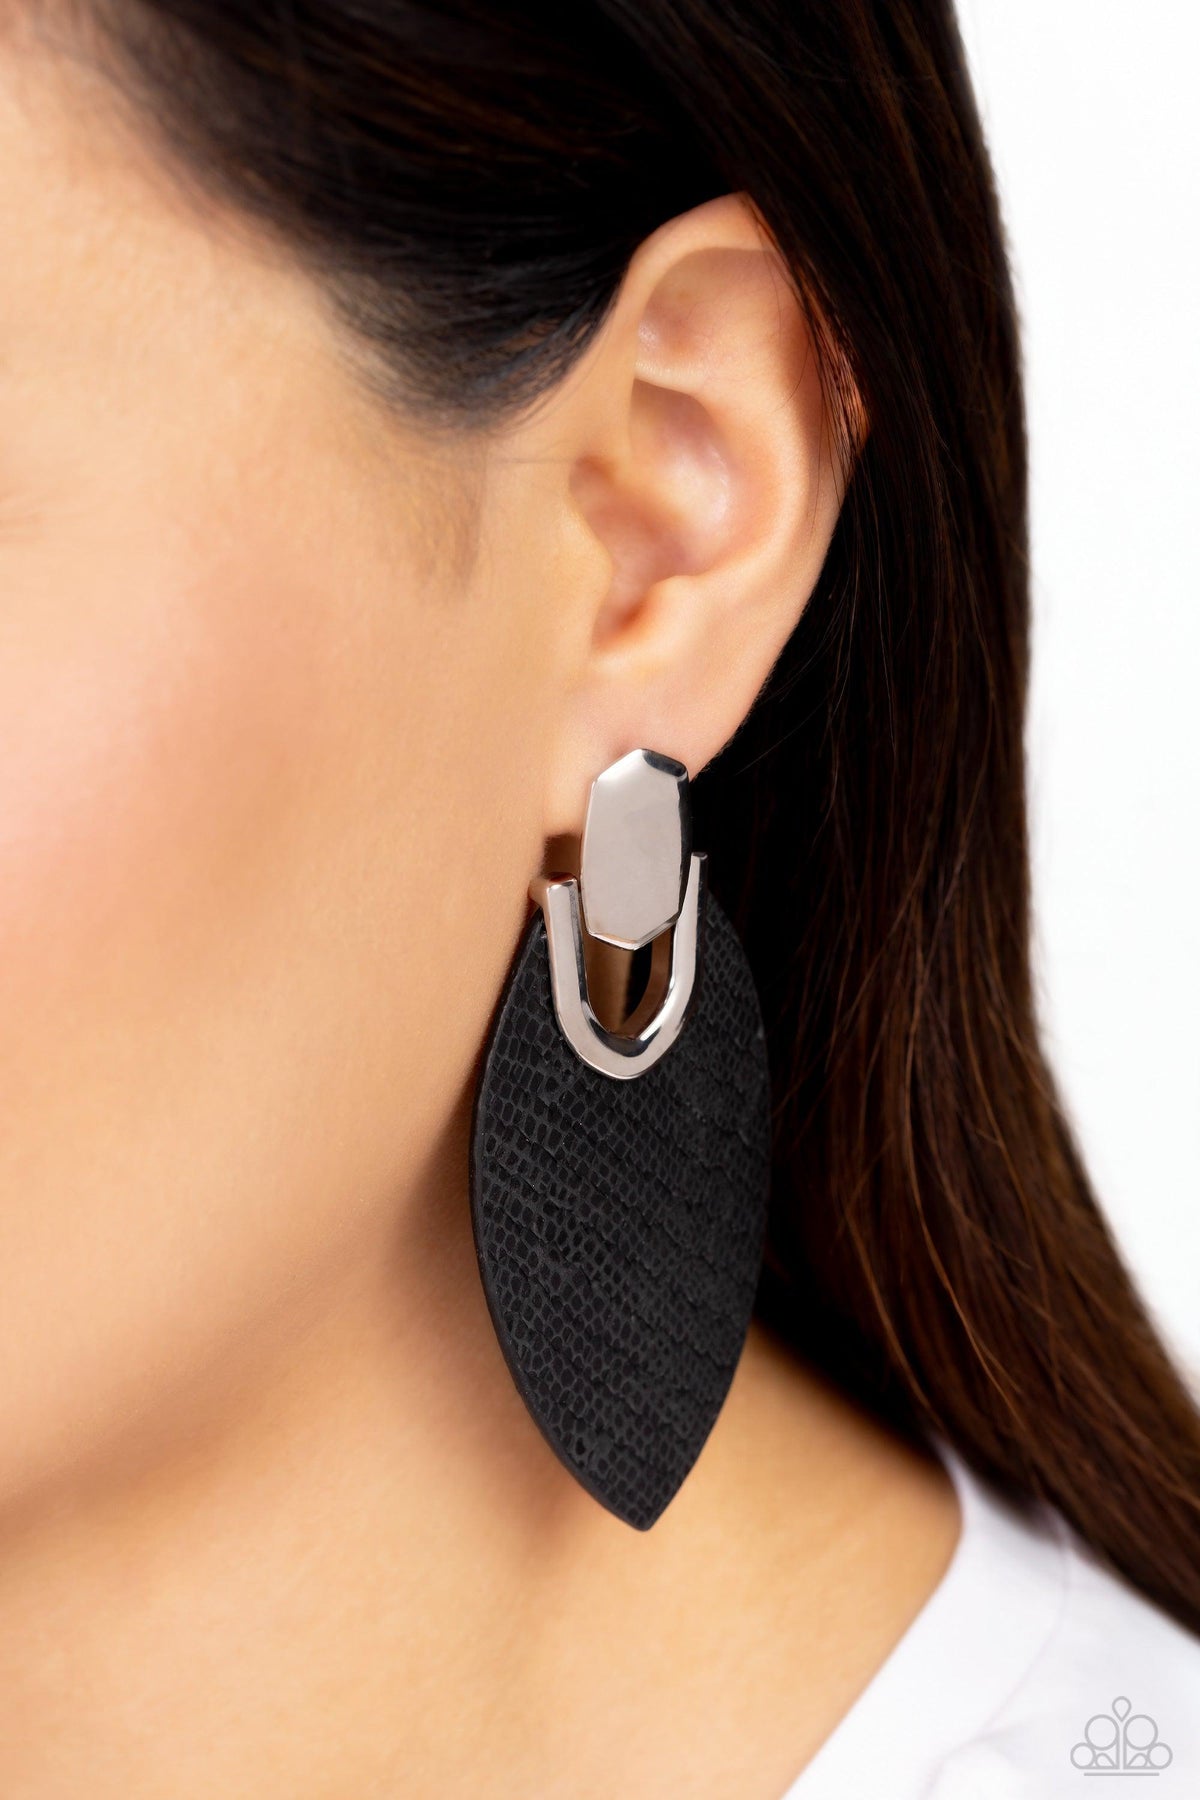 Wildly Workable Black Leather Earrings - Paparazzi Accessories-on model - CarasShop.com - $5 Jewelry by Cara Jewels